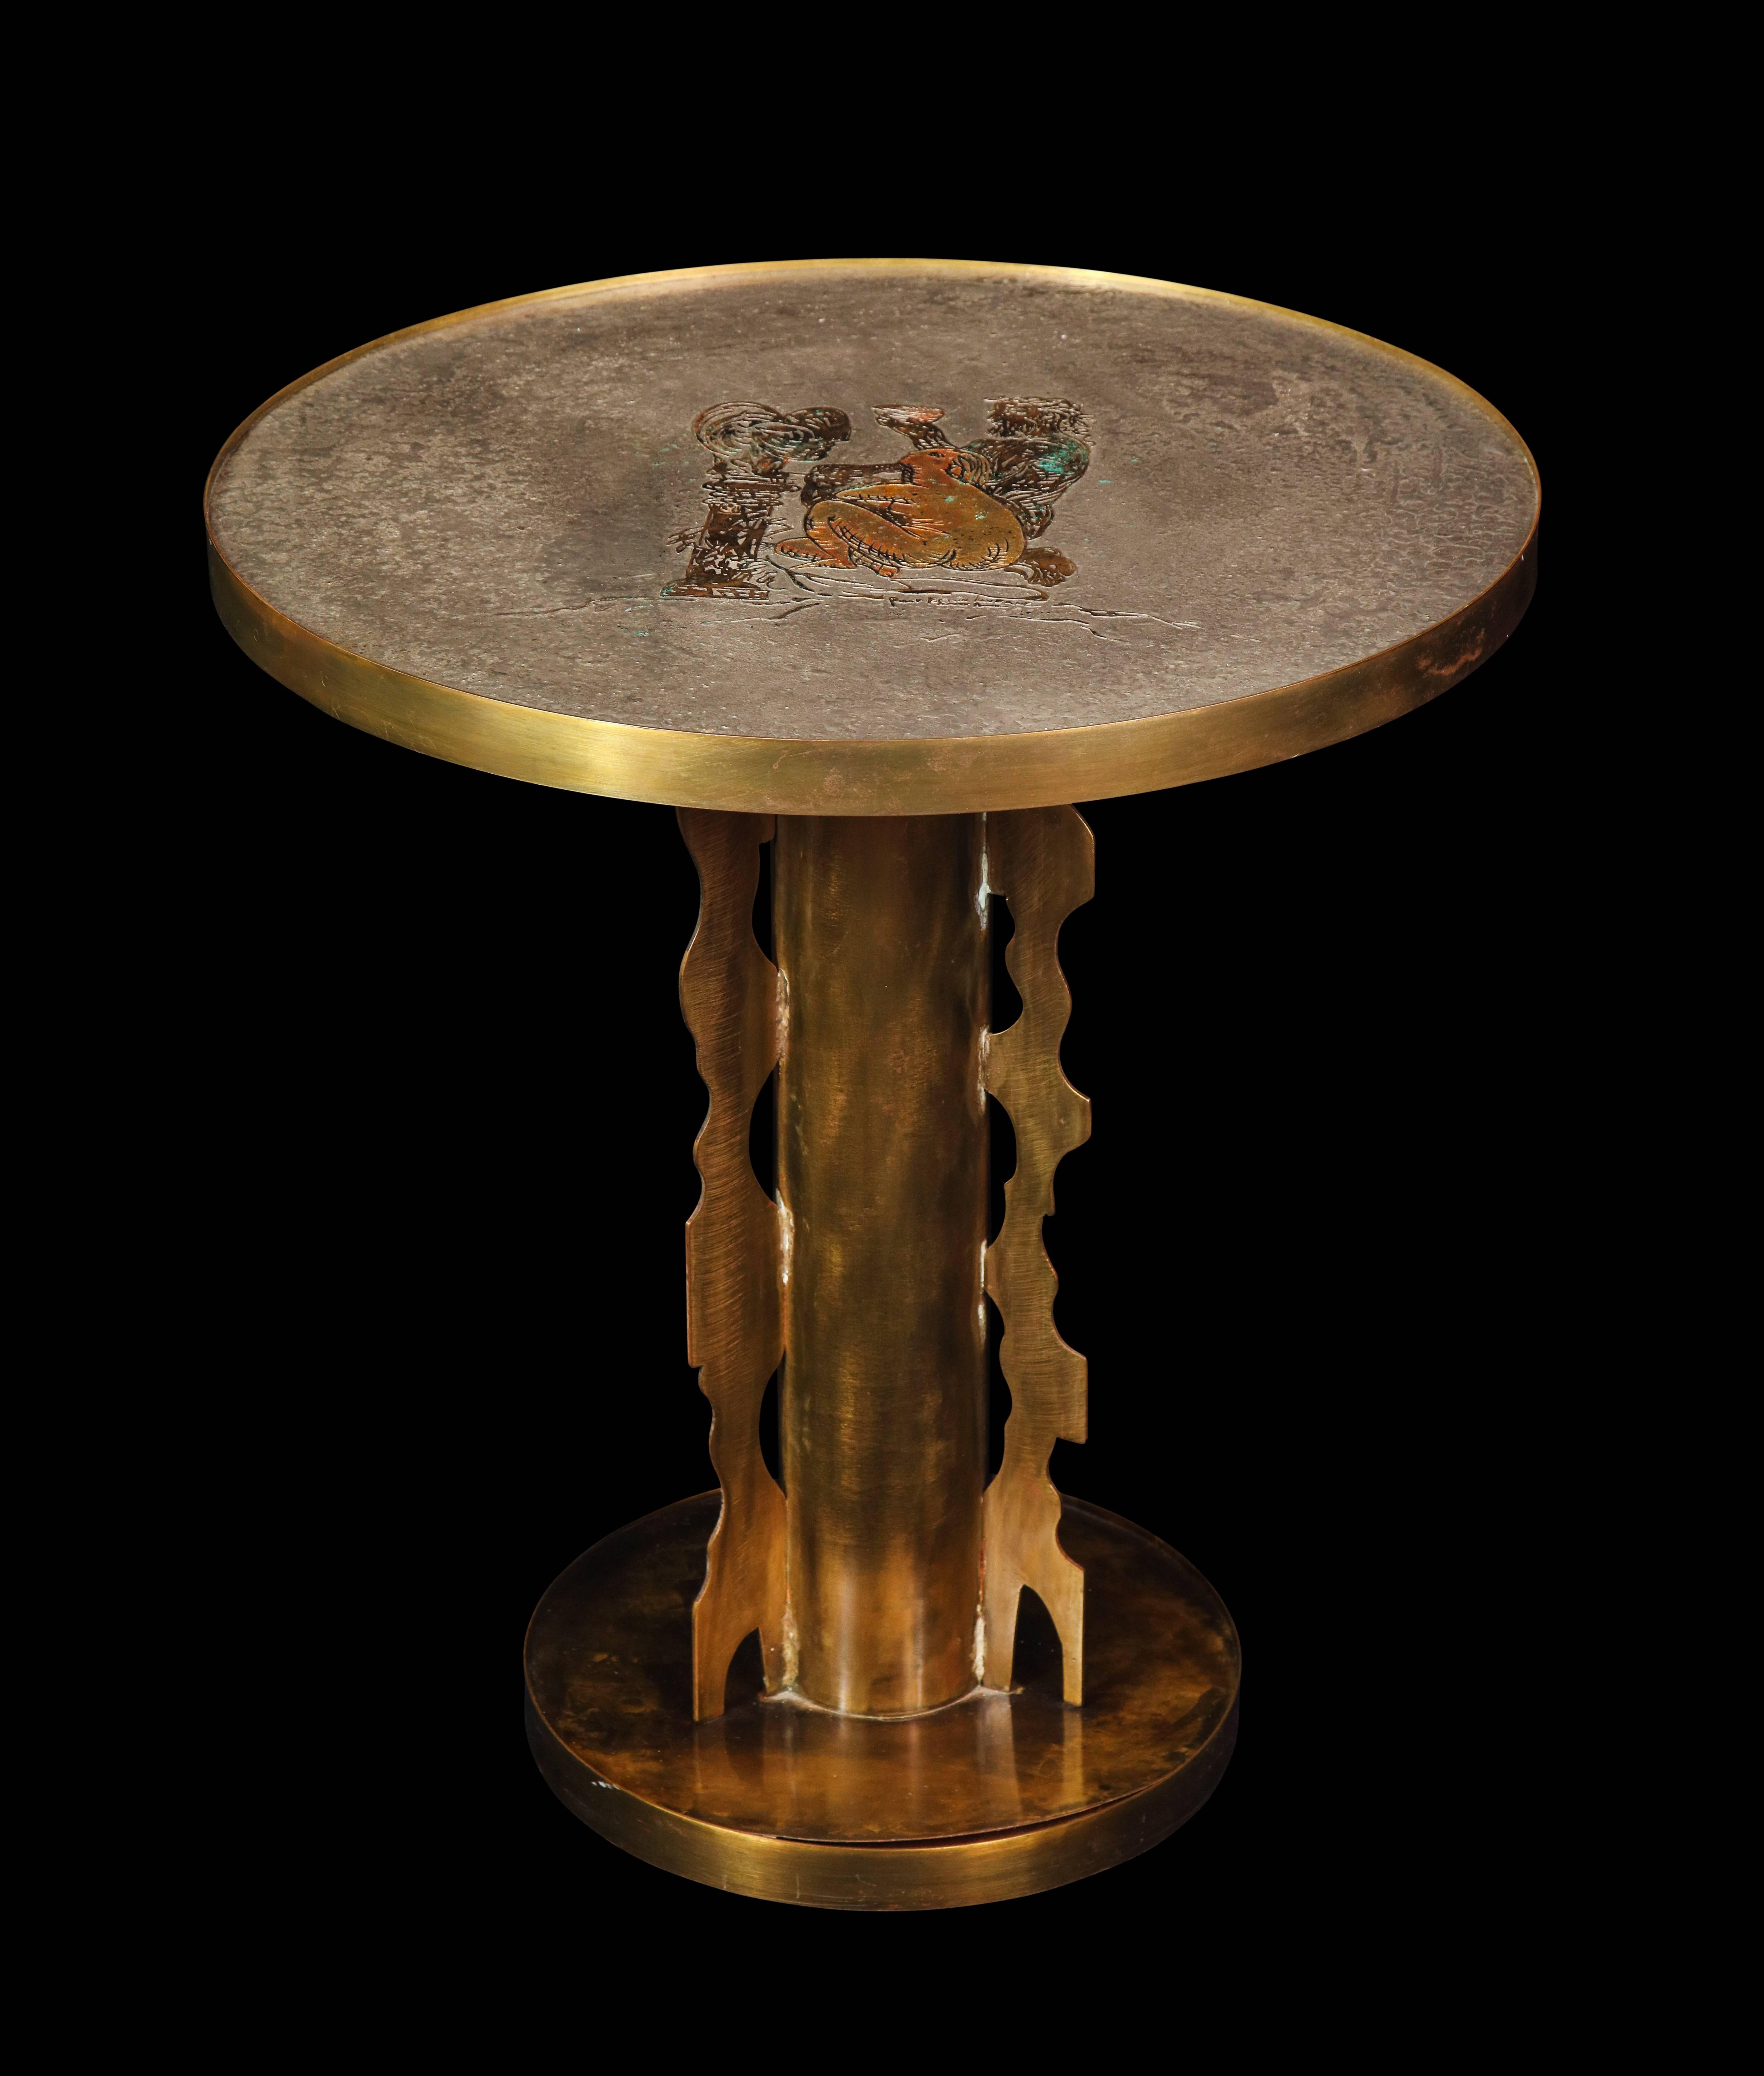 A unique pair of acid-etched polychromed hand enameled brass and pewter side or cocktail tables by Philip and Kelvin LaVerne depicting figural scenes after Picasso work suite Vollard.